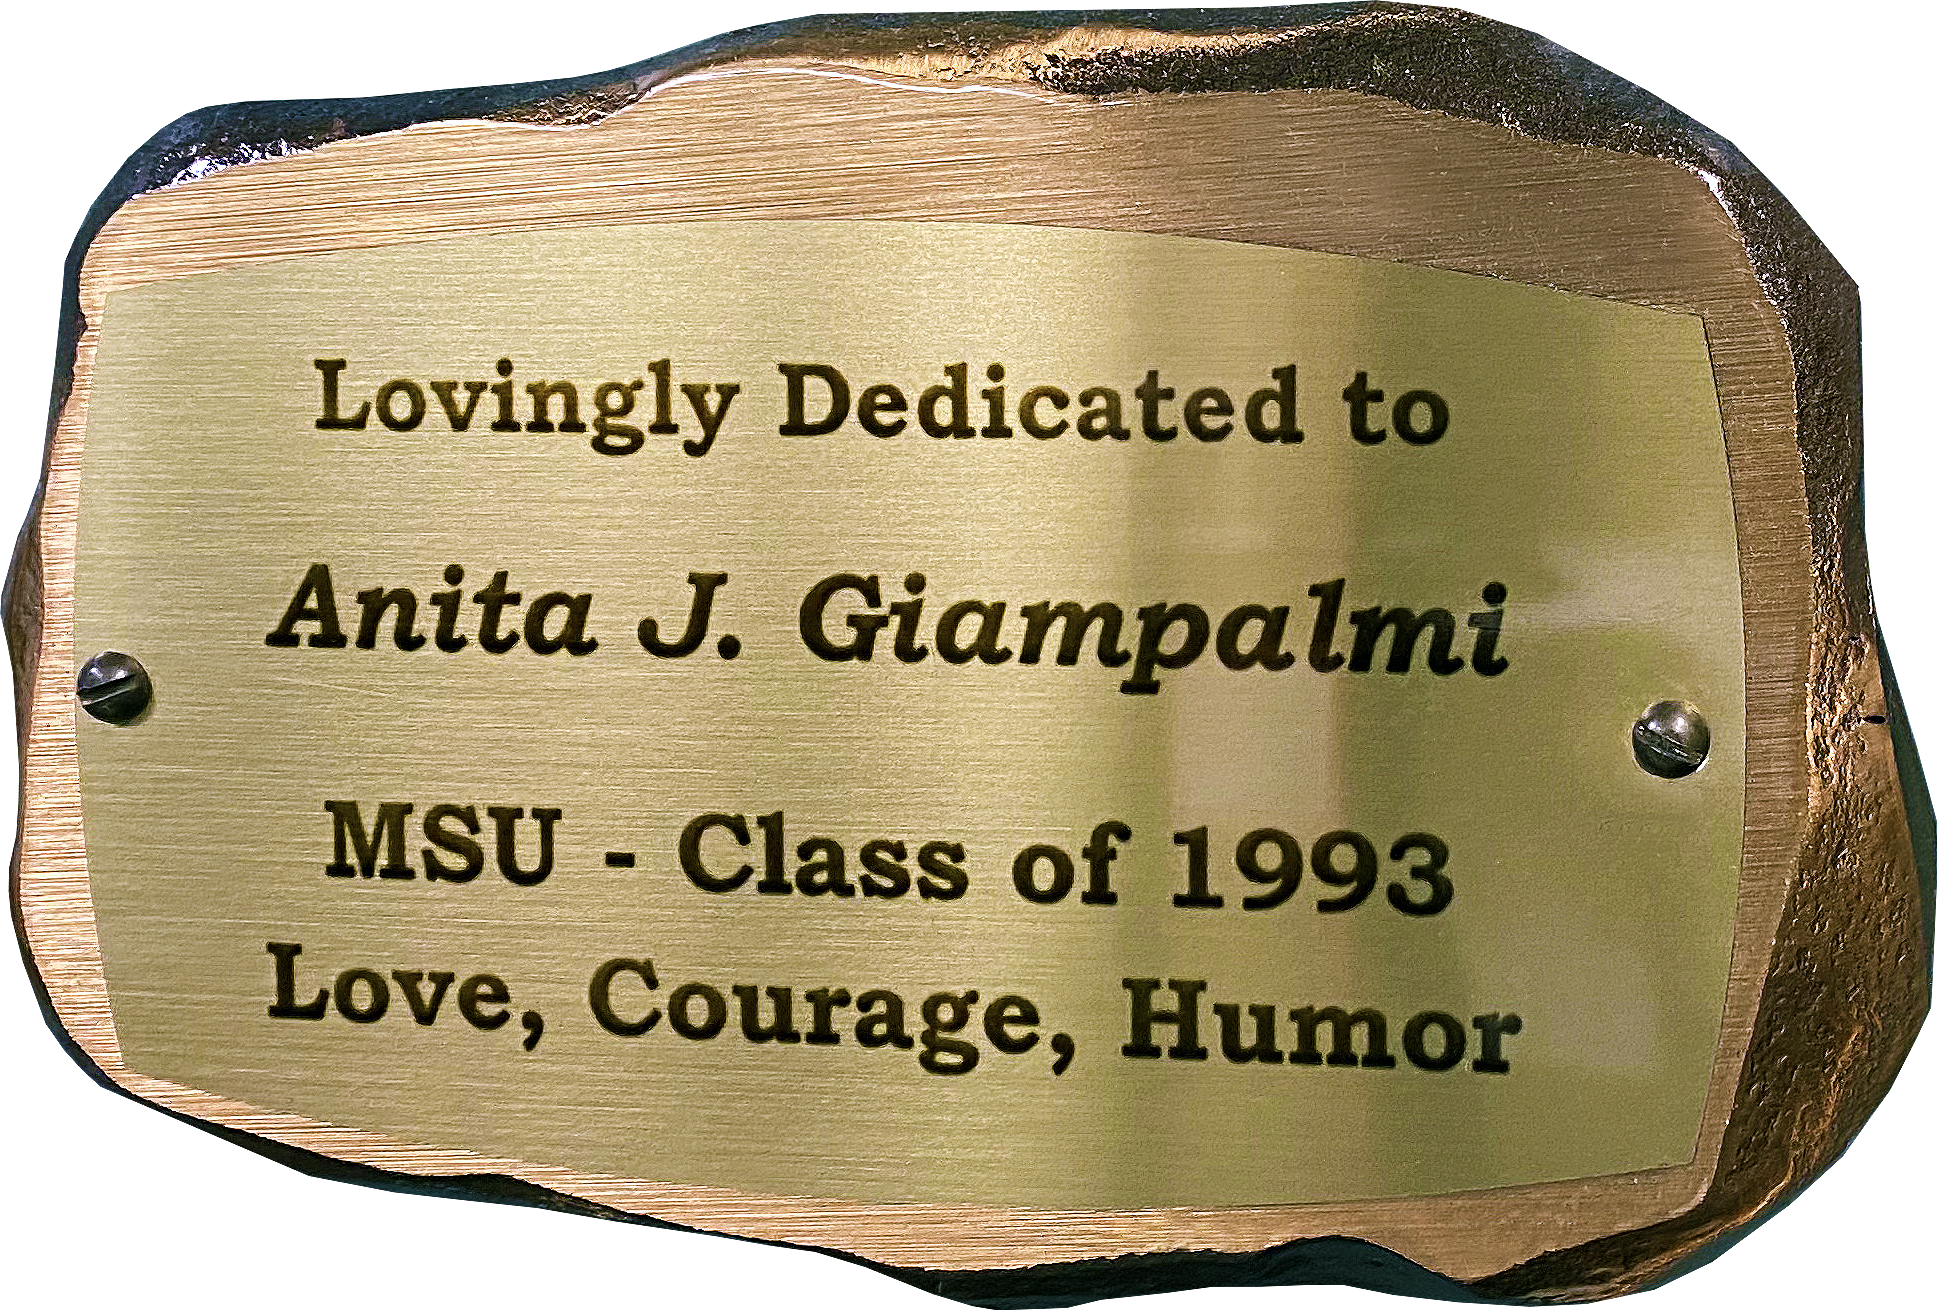 Inscribed bronze plaque in the shape of a rock with text on it reading: Lovingly Dedicated to Anita J. Giampalmi. MSU - Class of 1993. Love, Courage, Humor. 